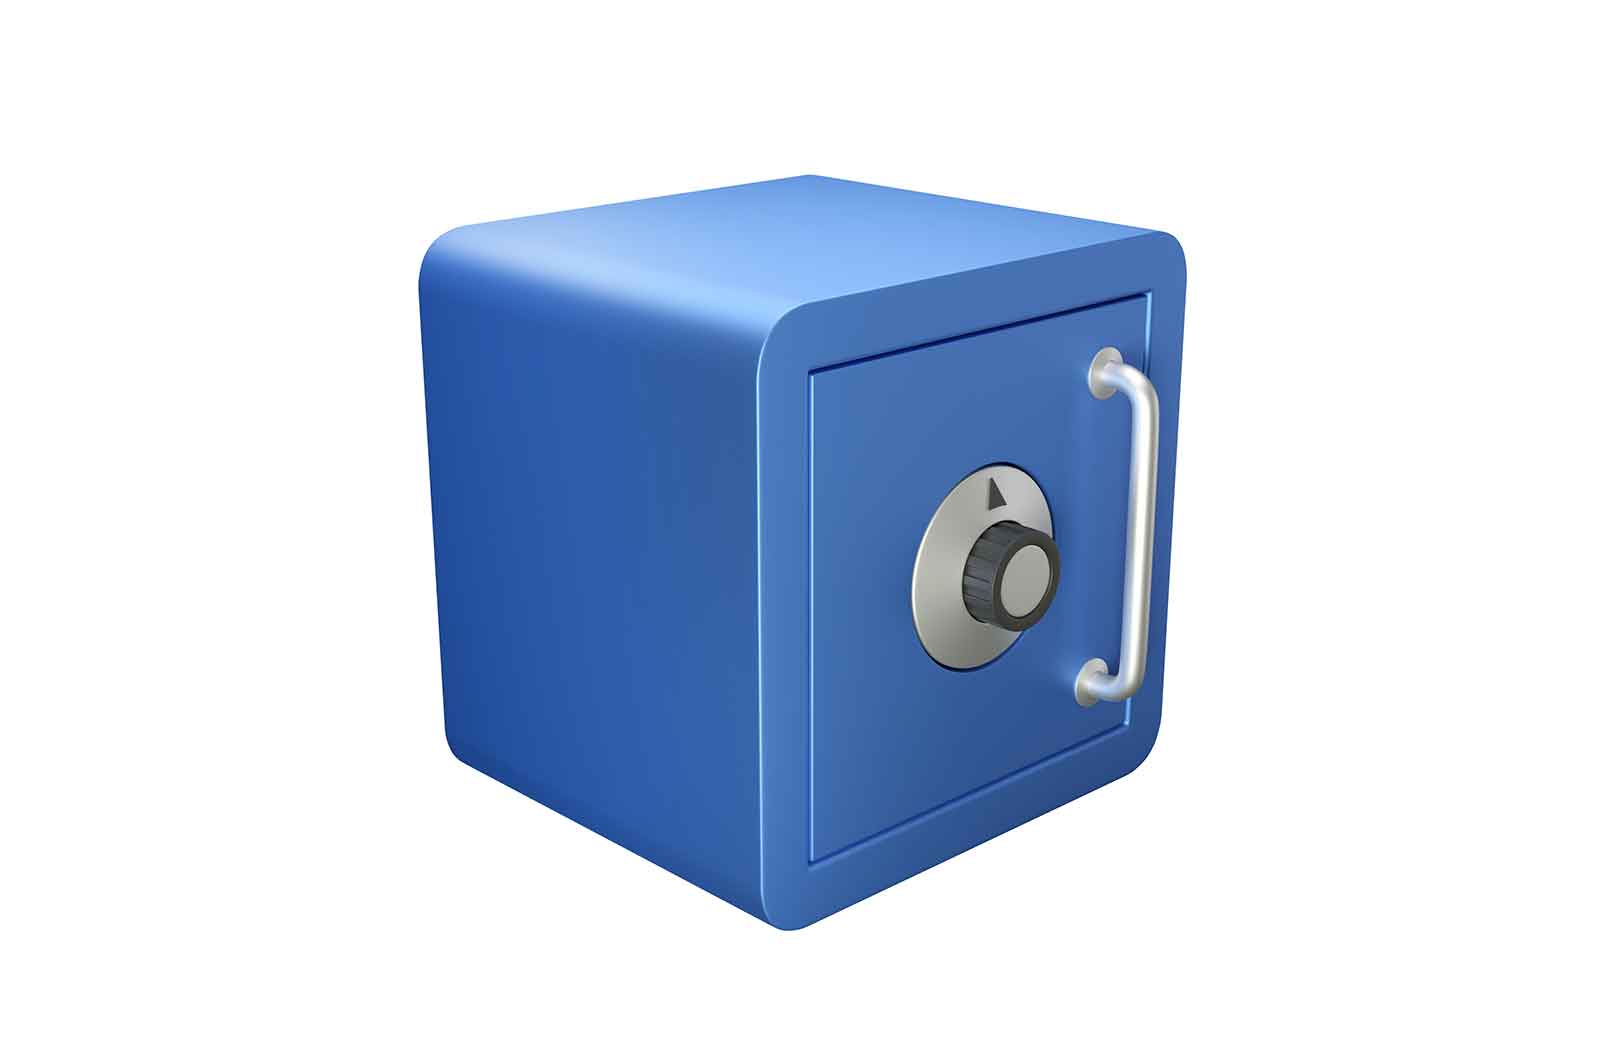 Safe for money icon, blue closed strongbox 3D rendered illustration. Strong fireproof box with complex lock, used for storage of valuables.ё